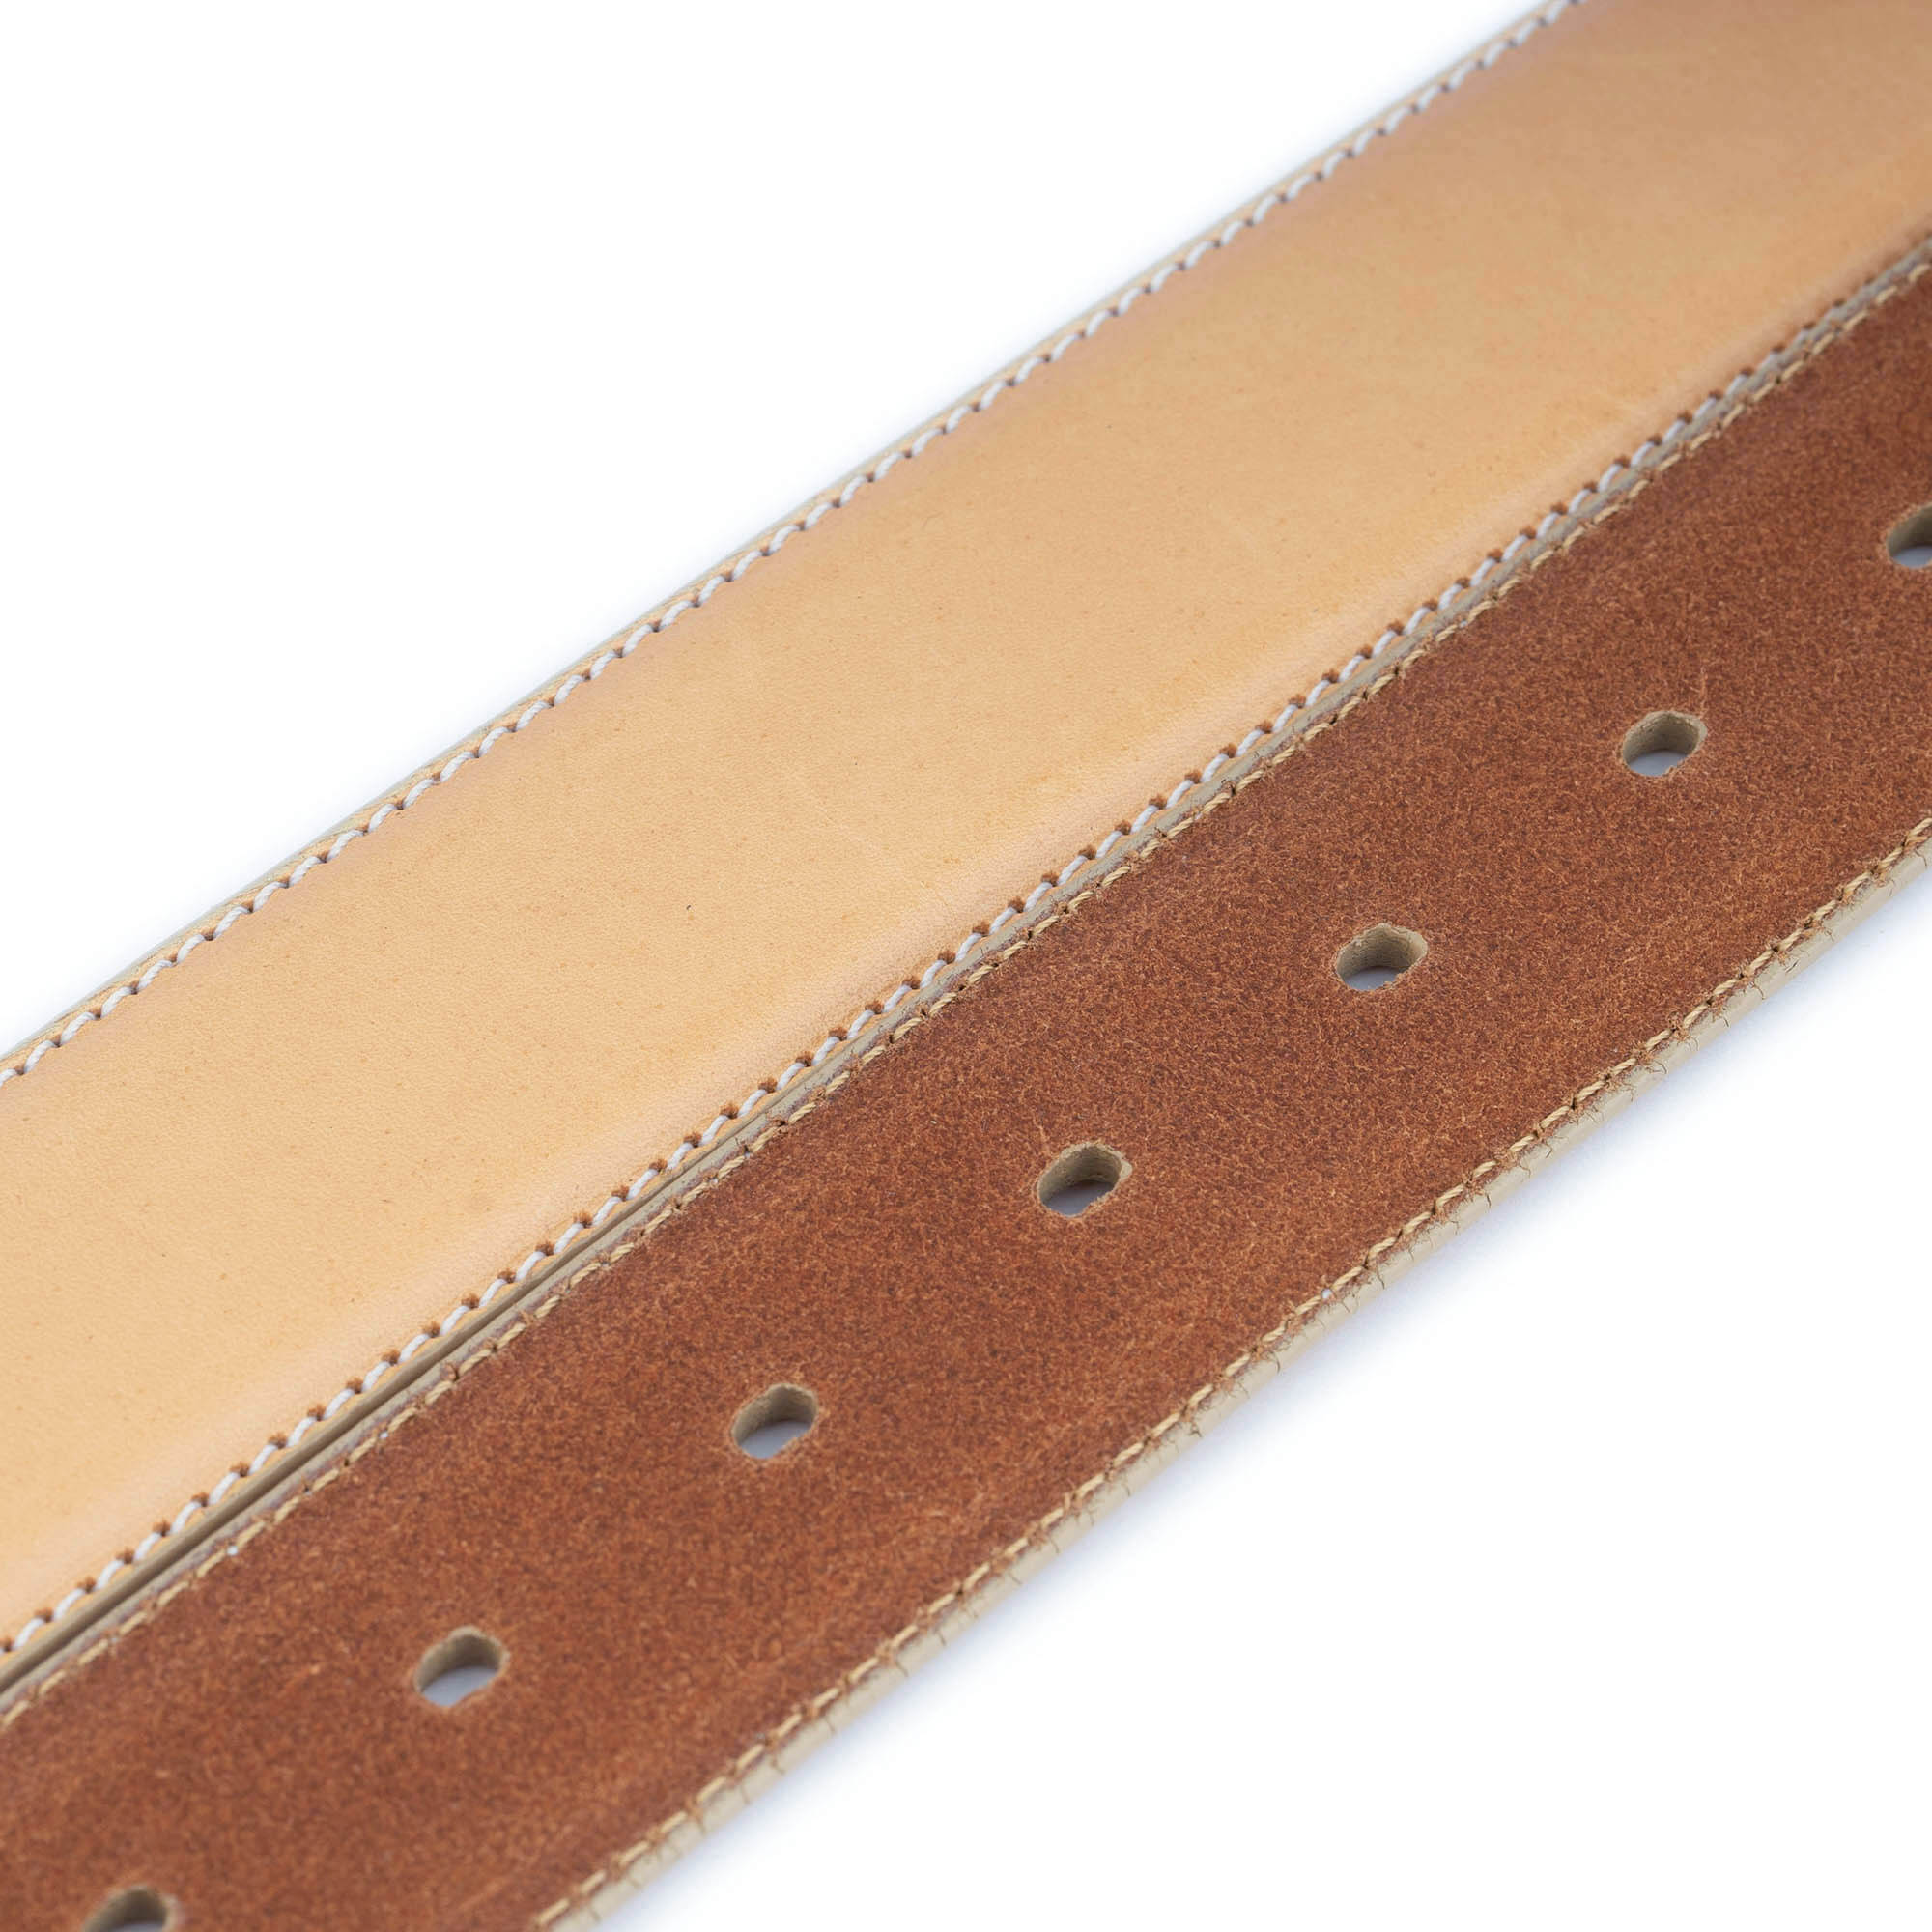 Replacement Leather Belt Strap For Louis Vuitton Buckles 35 Mm